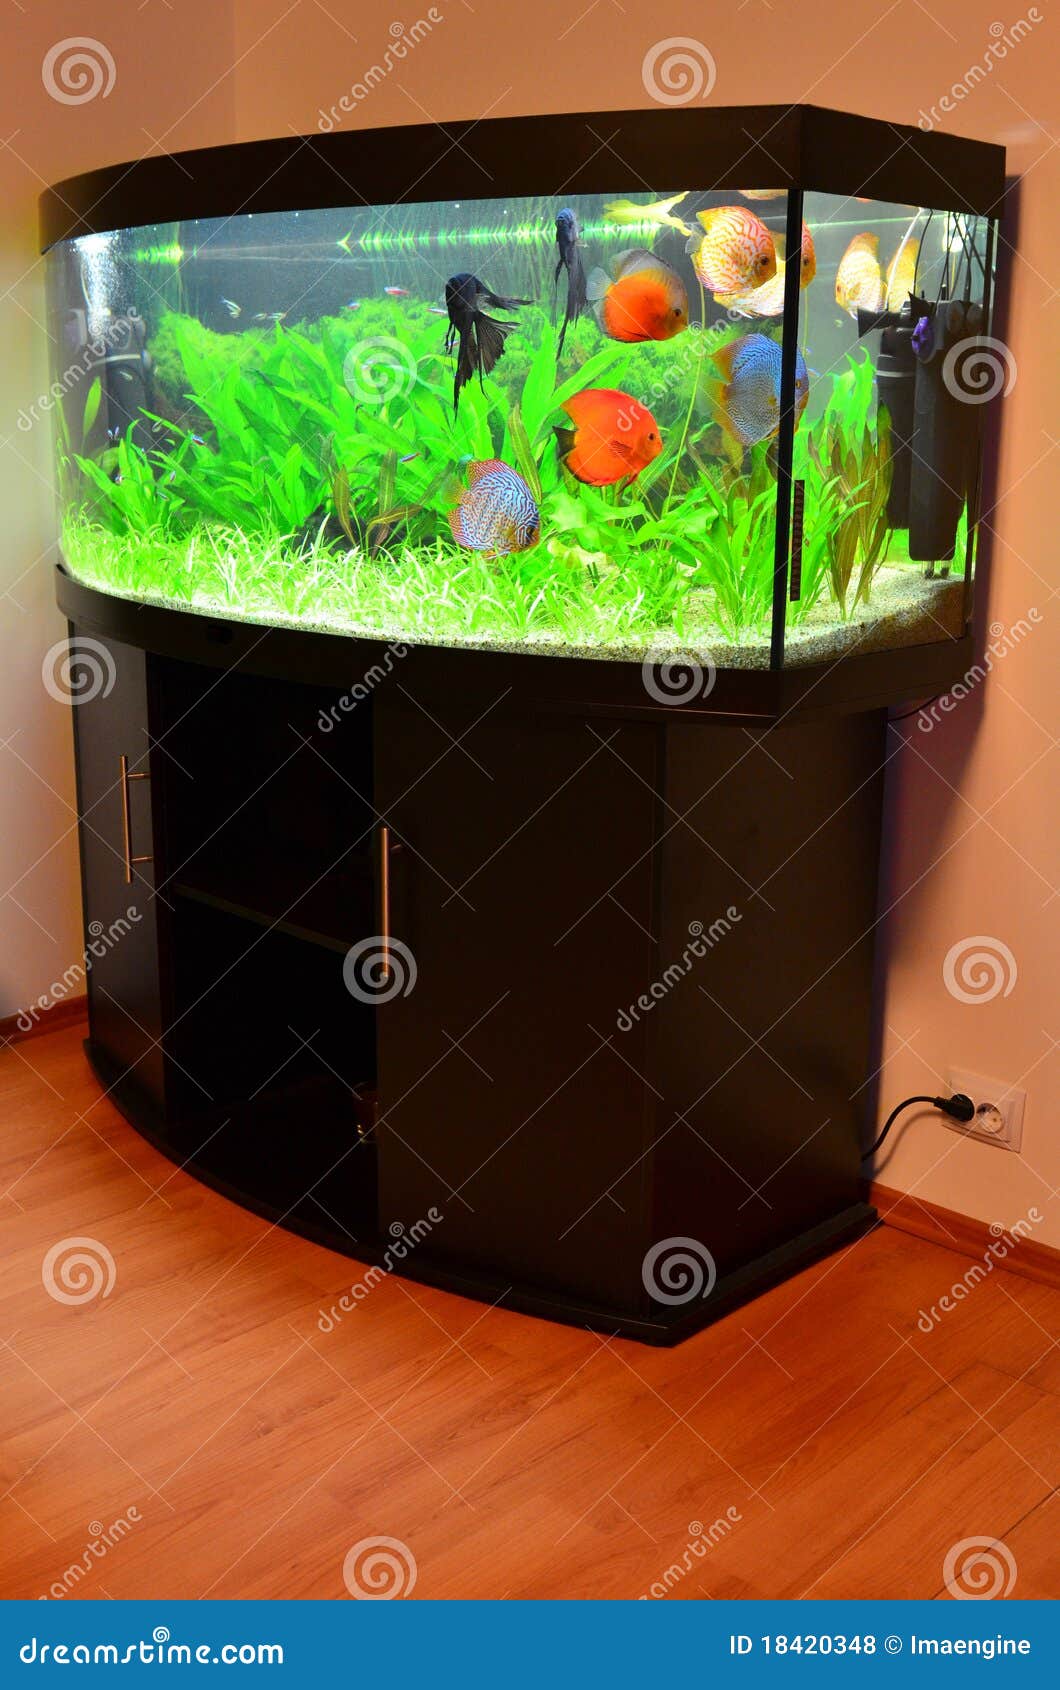 Home Aquarium With Discus Fish And Plants Royalty Free Stock ...